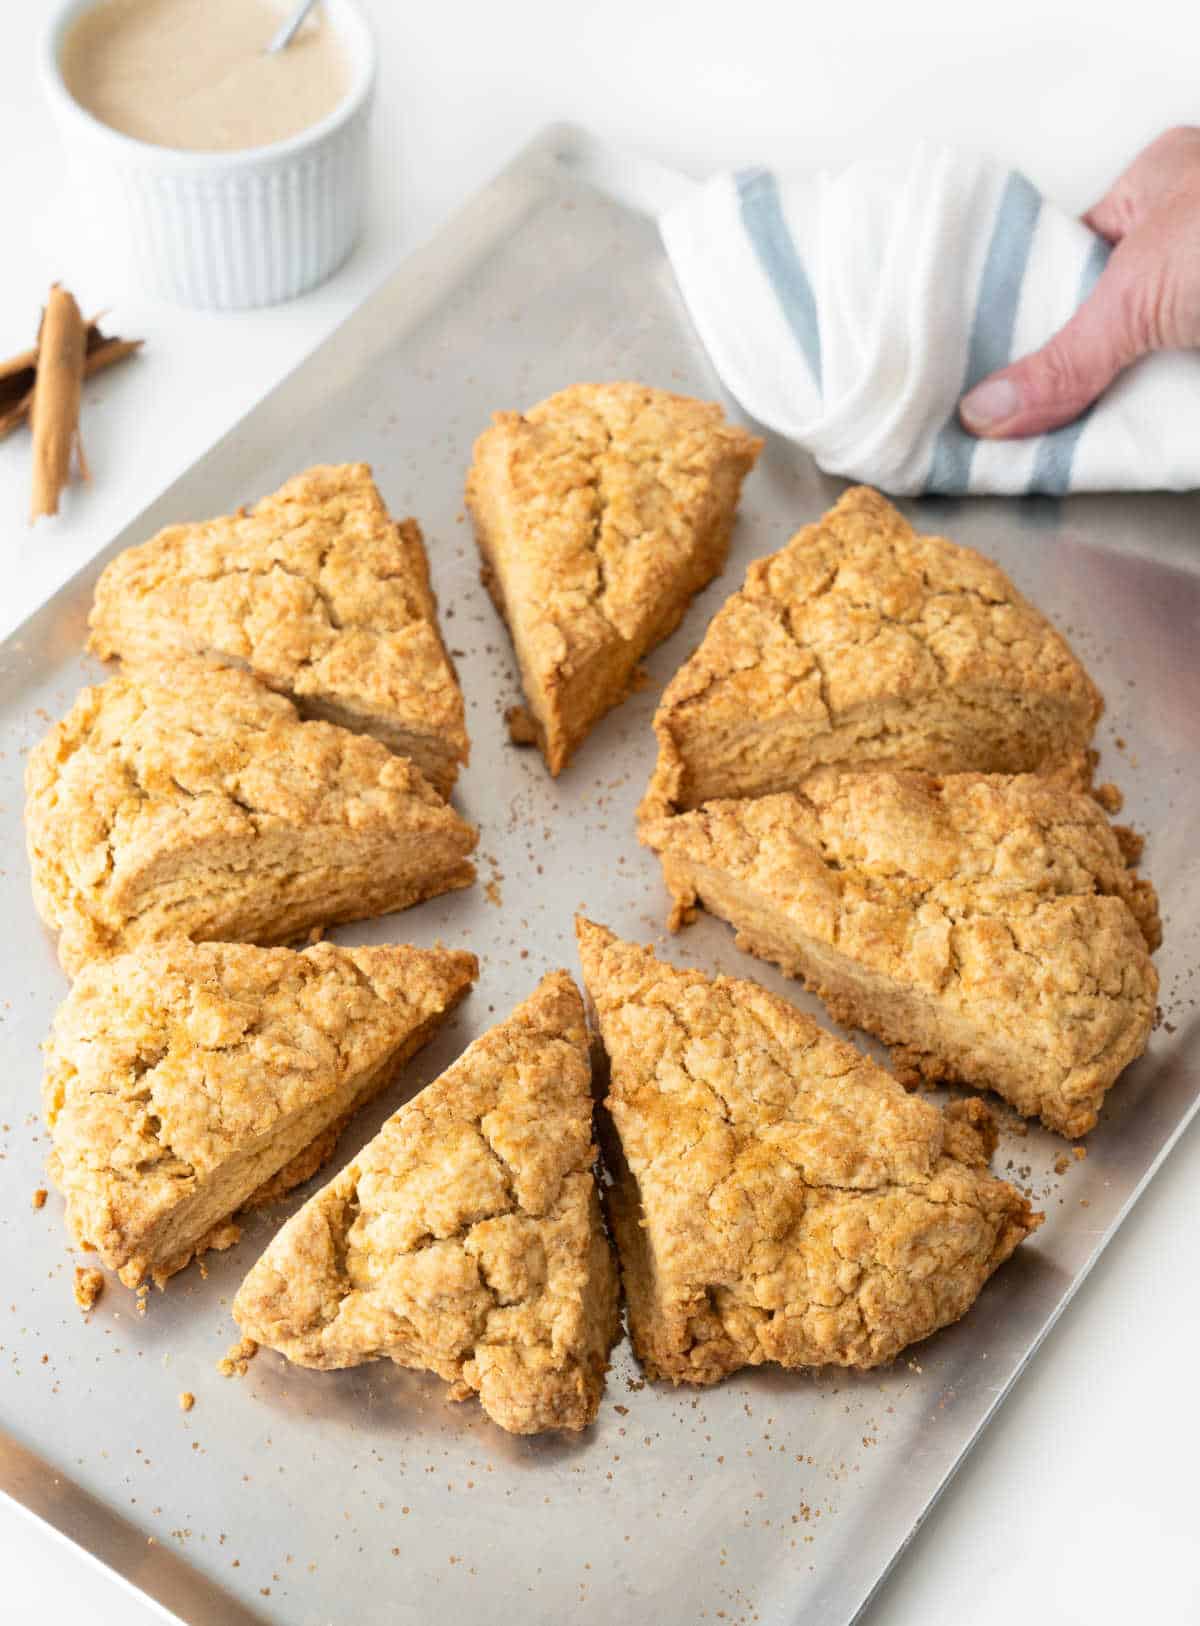 Baked cinnamon scone triangles on a metal sheet. Hand holding it with a towel.